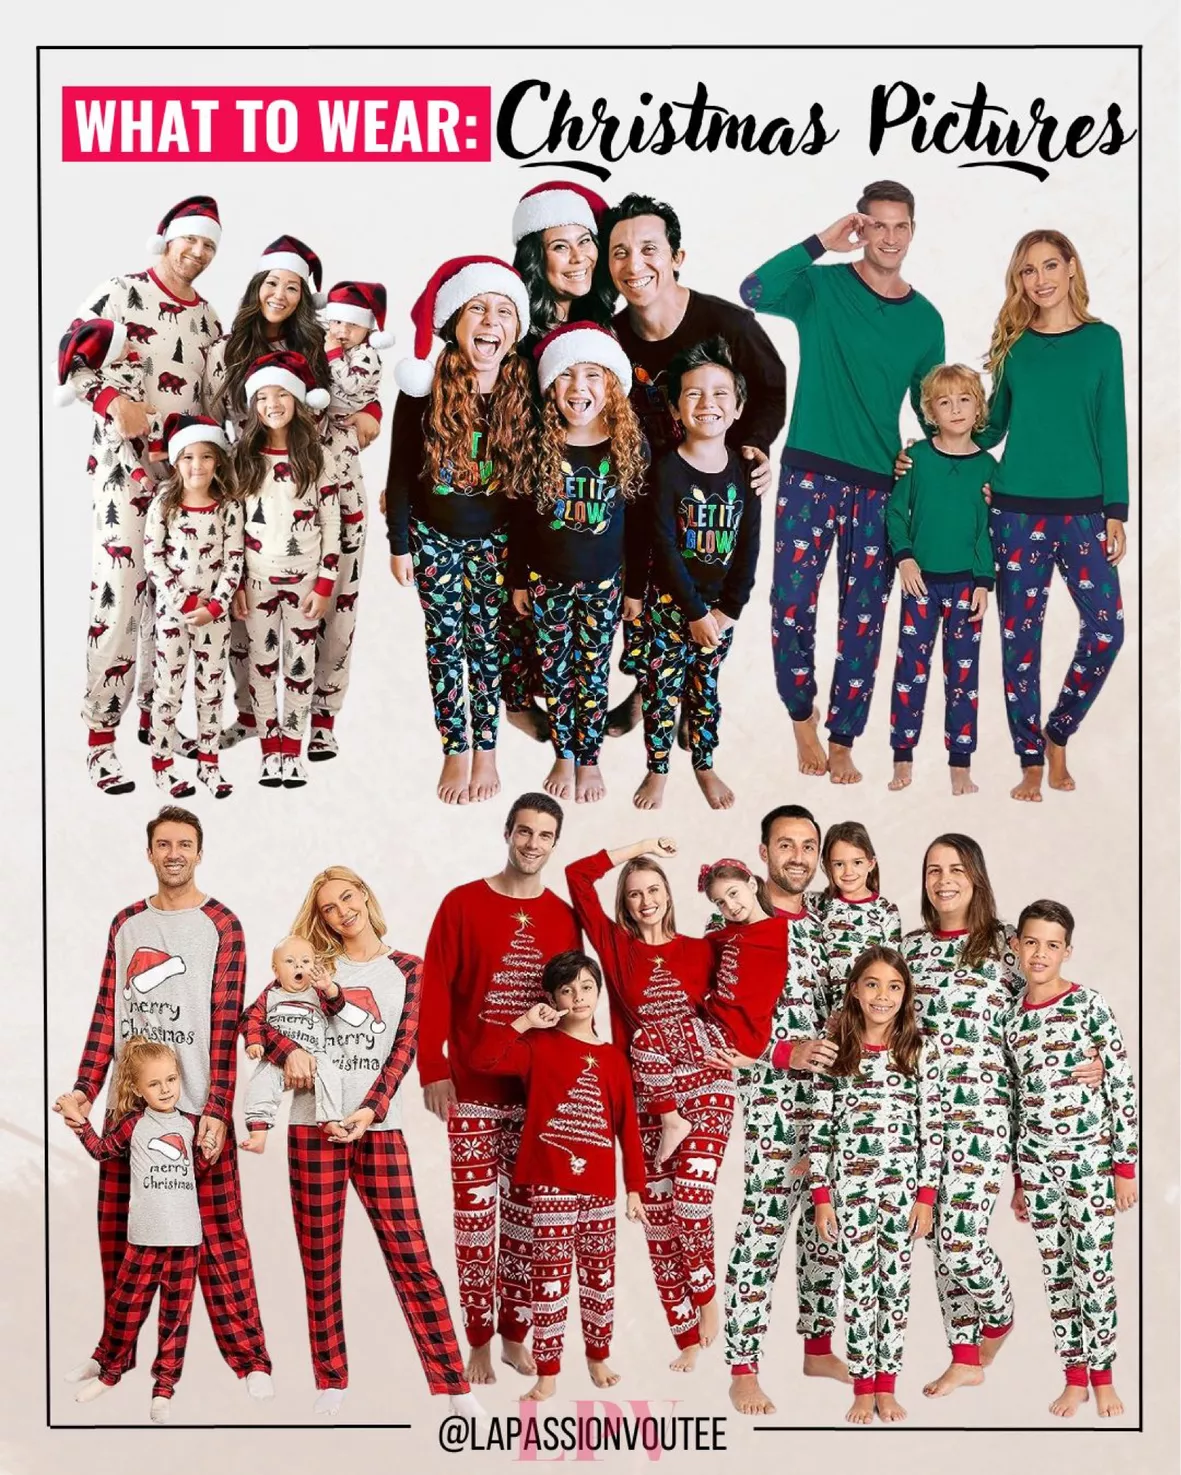  The Children's Place Kids Family Matching, Festive